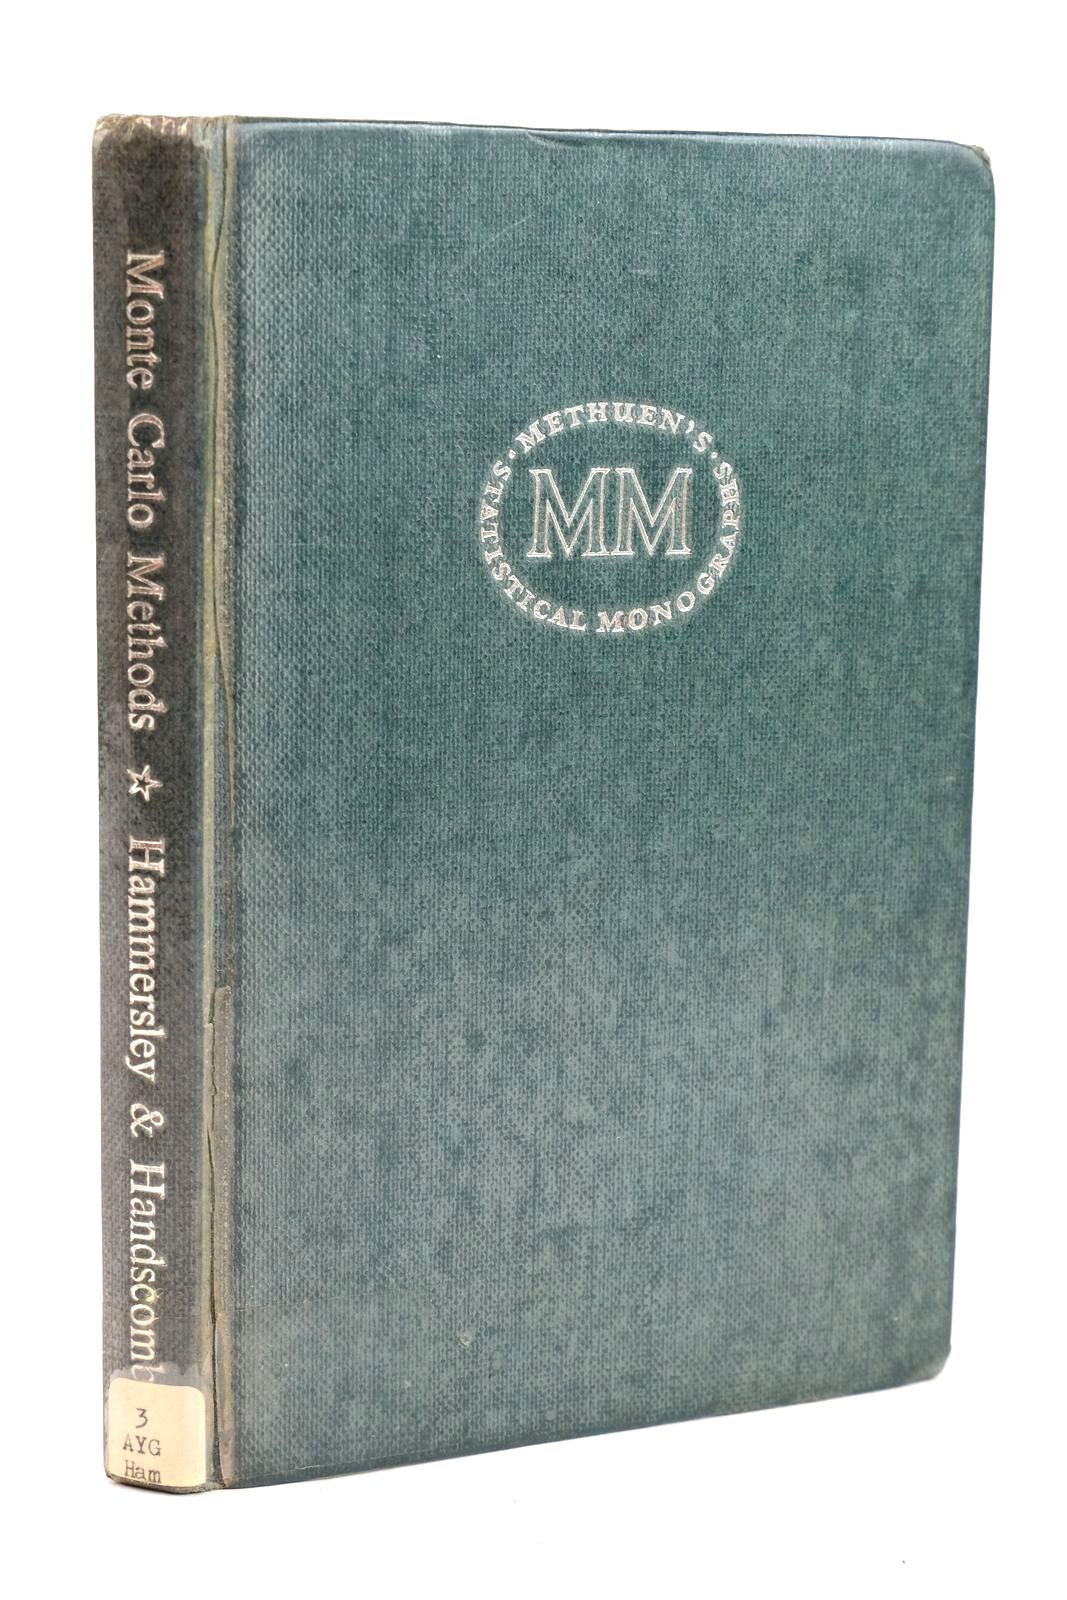 Photo of MONTE CARLO METHODS written by Hammersley, J.M. Handscomb, D.C. published by Methuen &amp; Co. Ltd. (STOCK CODE: 1319607)  for sale by Stella & Rose's Books